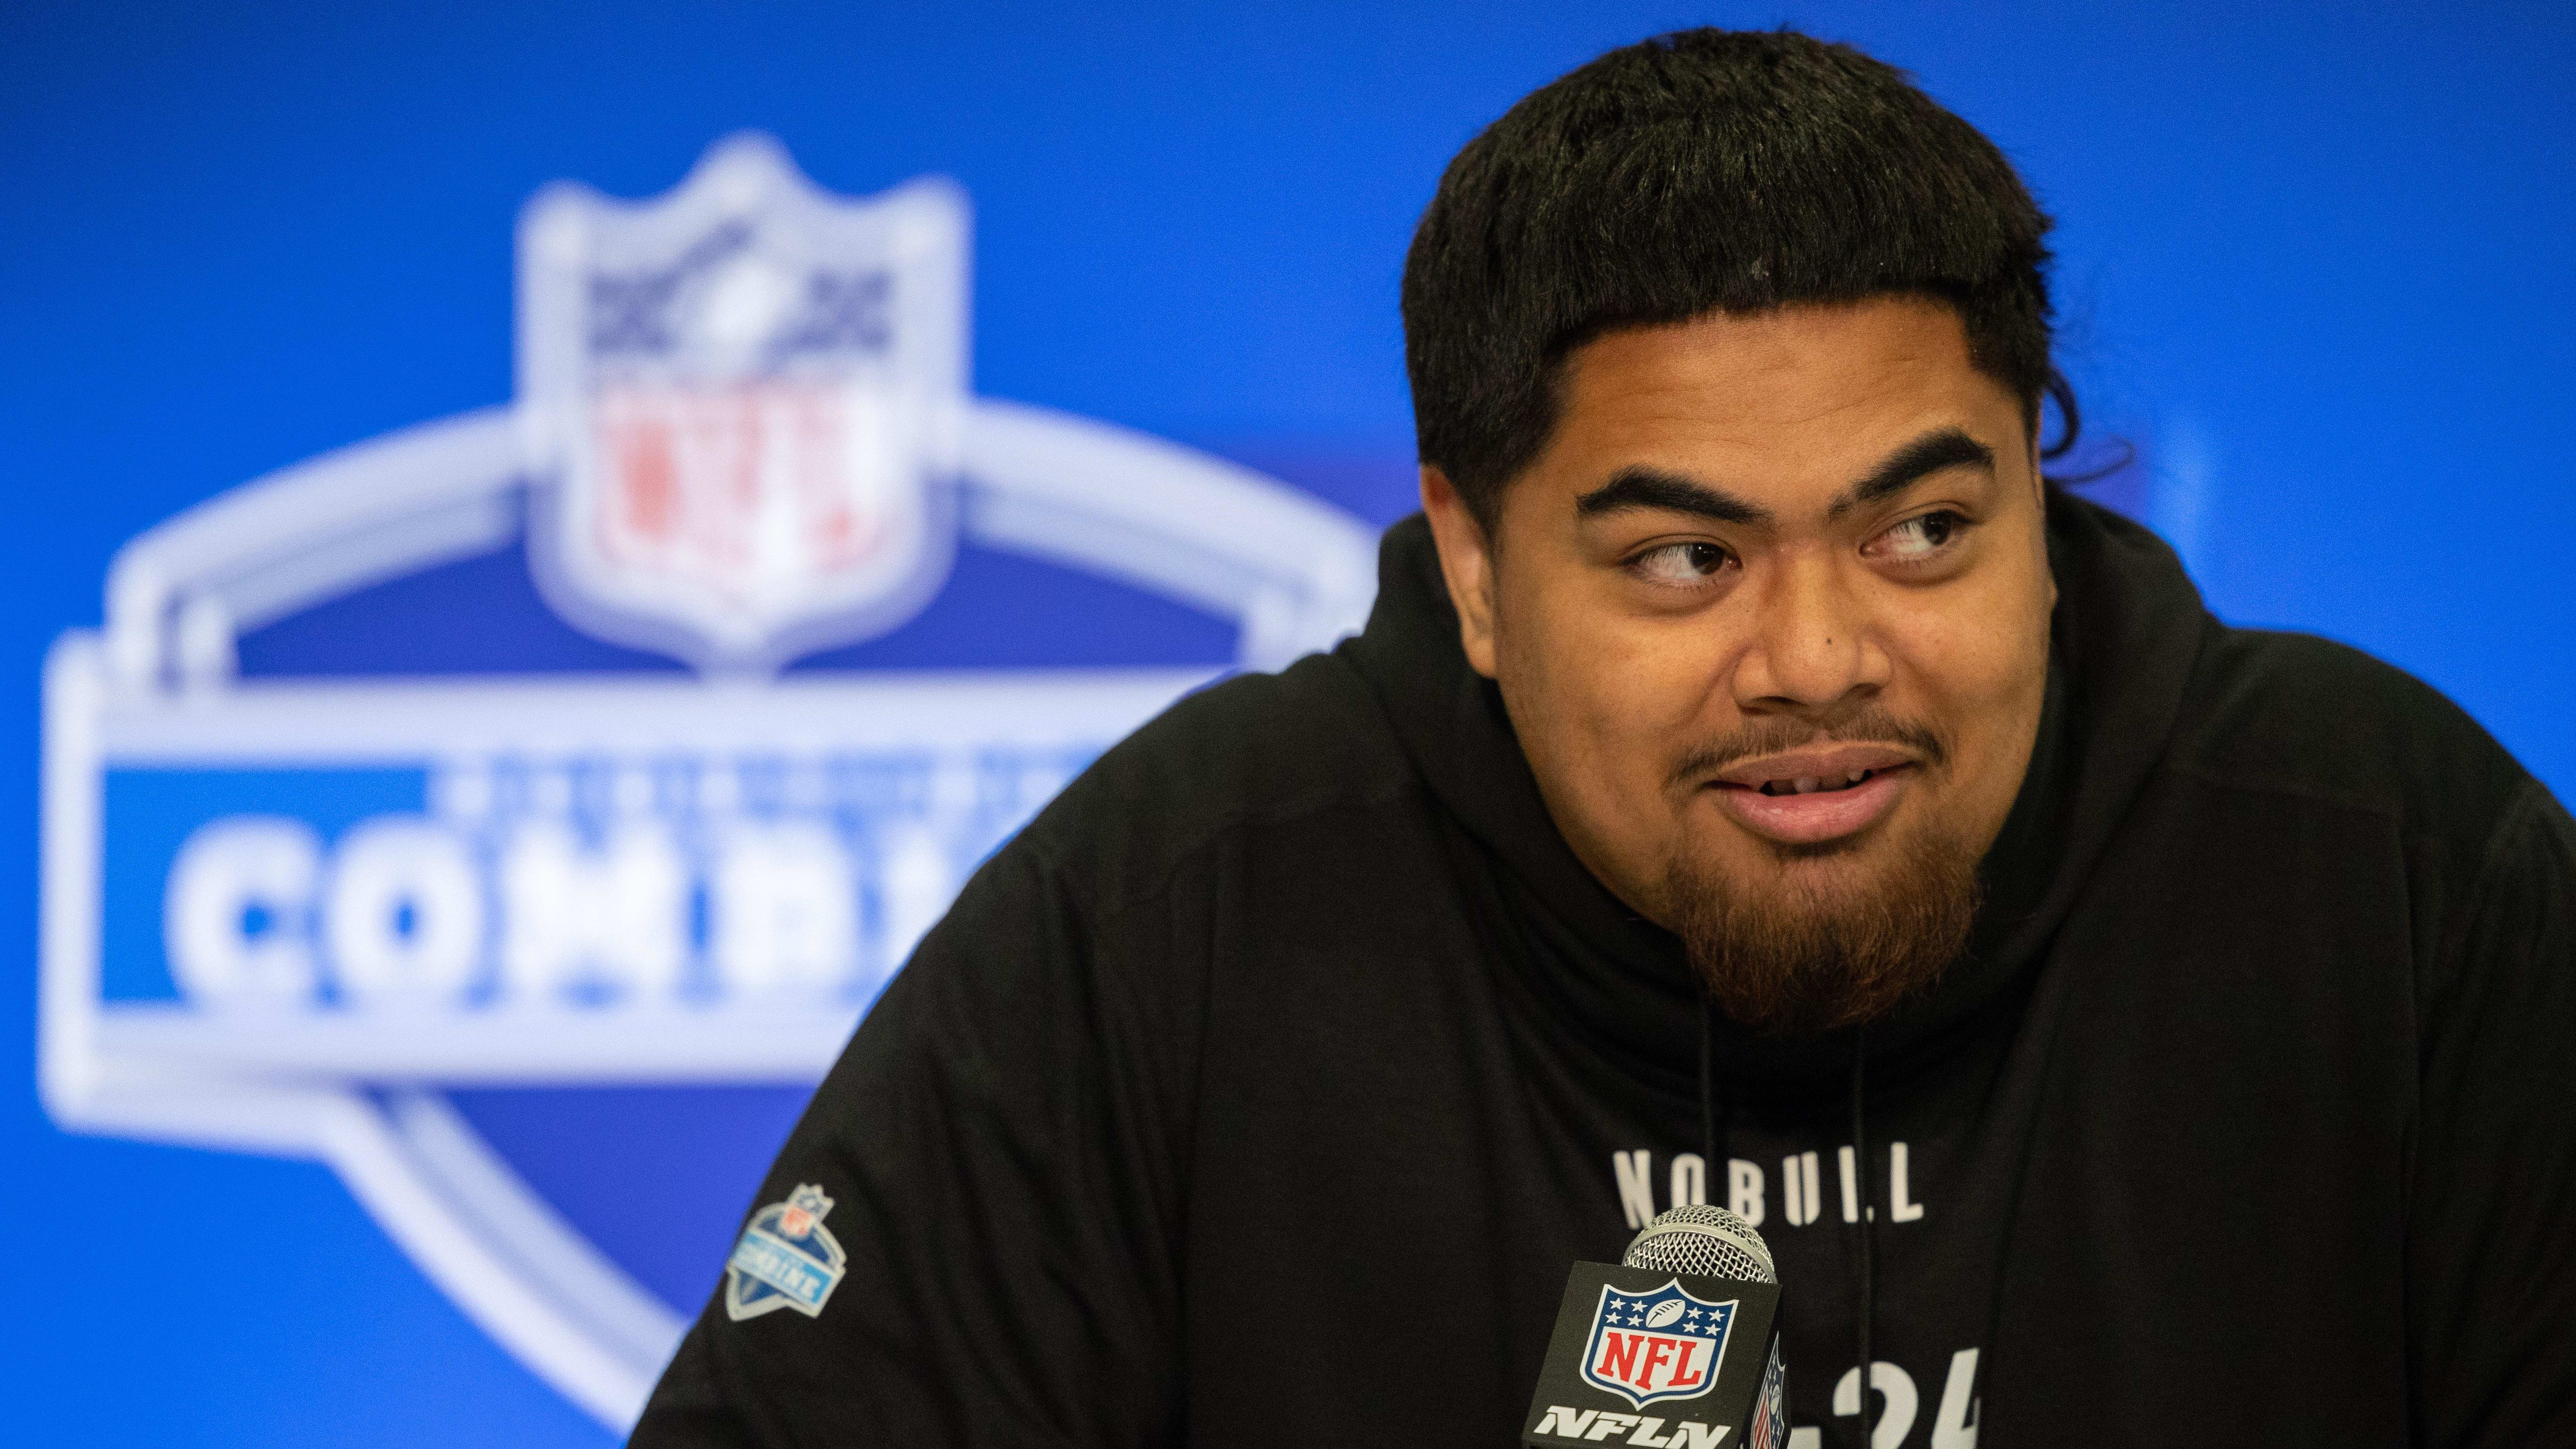 Oregon State offensive lineman Taliese Fuaga talks to the media during the NFL Combine.